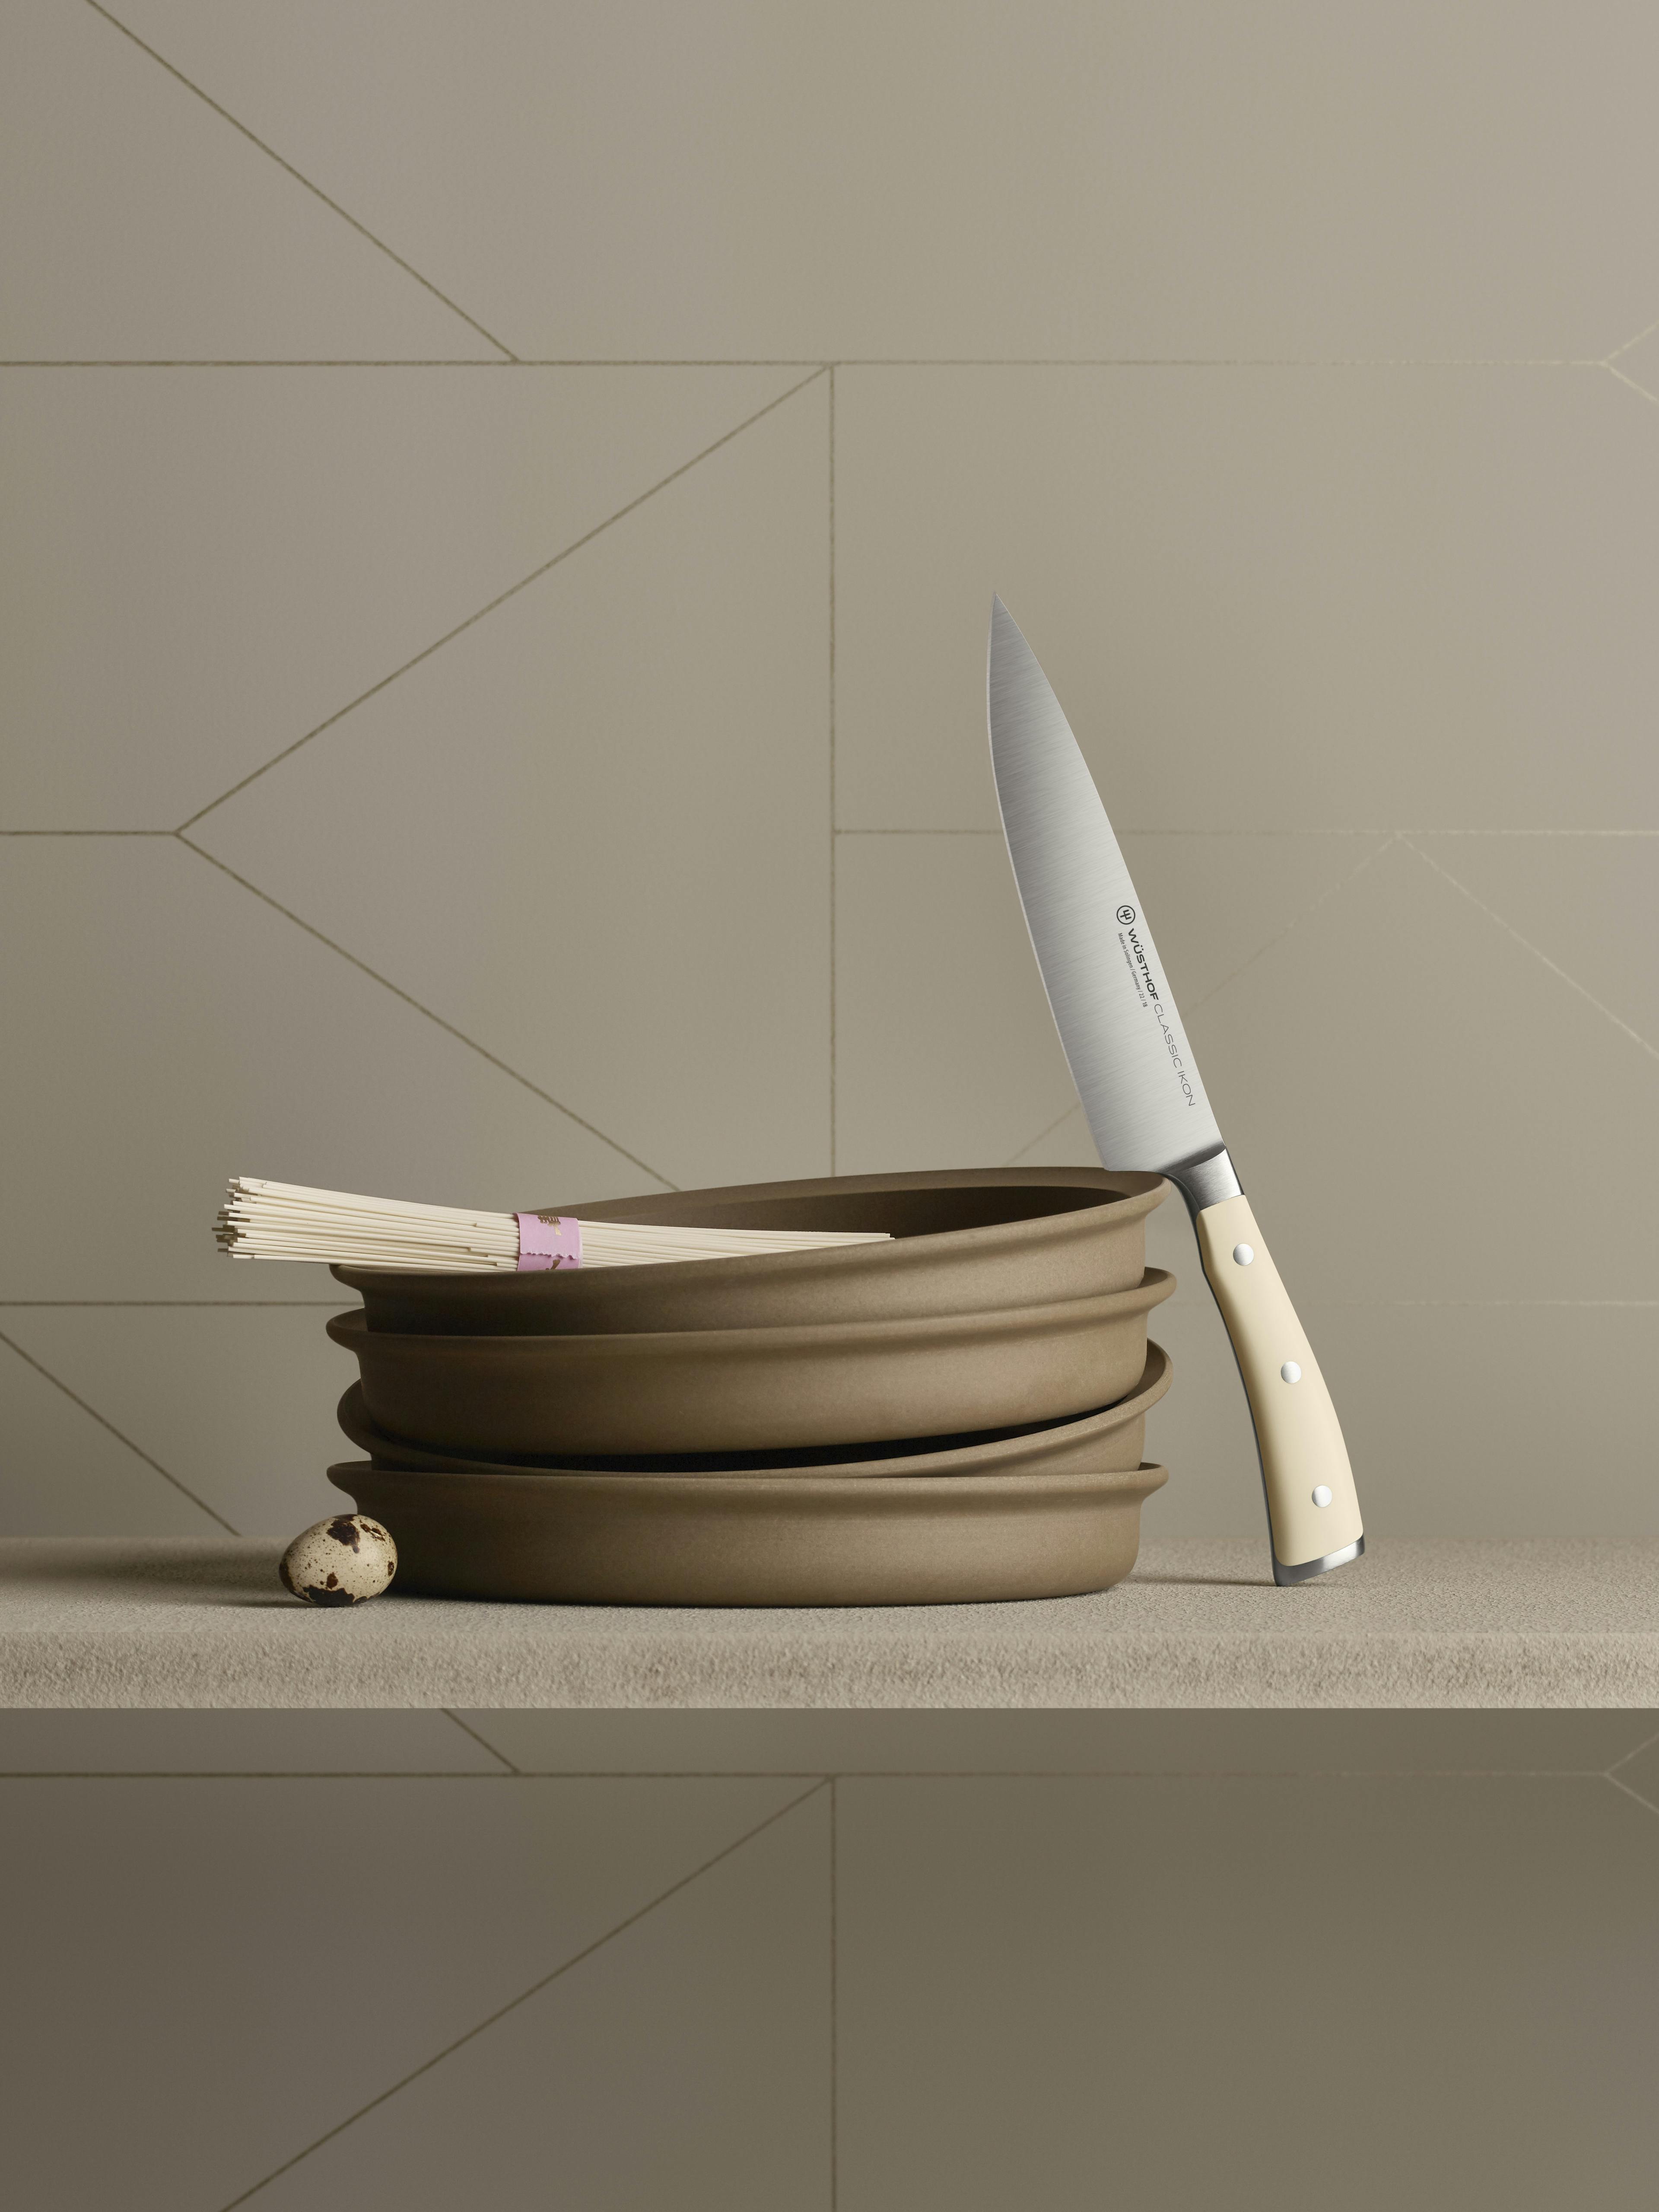 Classic Ikon Chef's Knife next to terracotta bowls